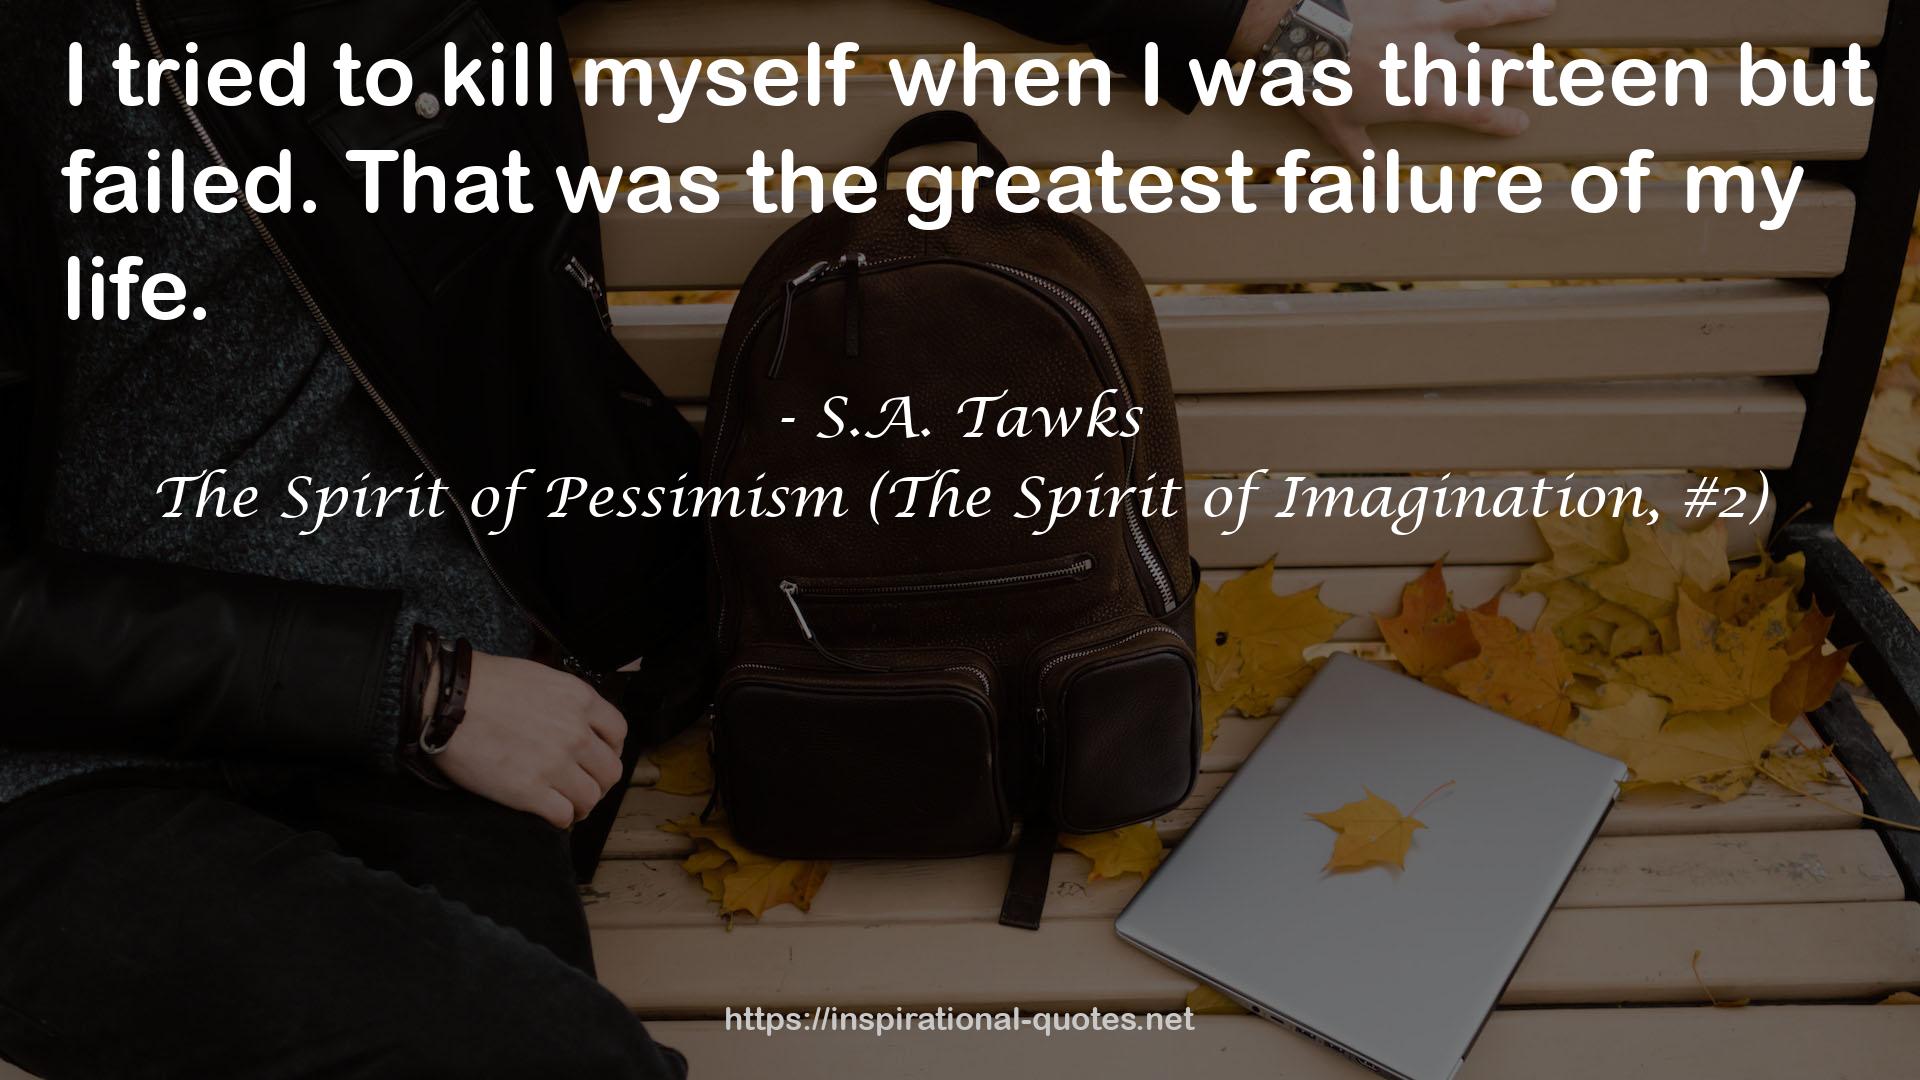 S.A. Tawks QUOTES